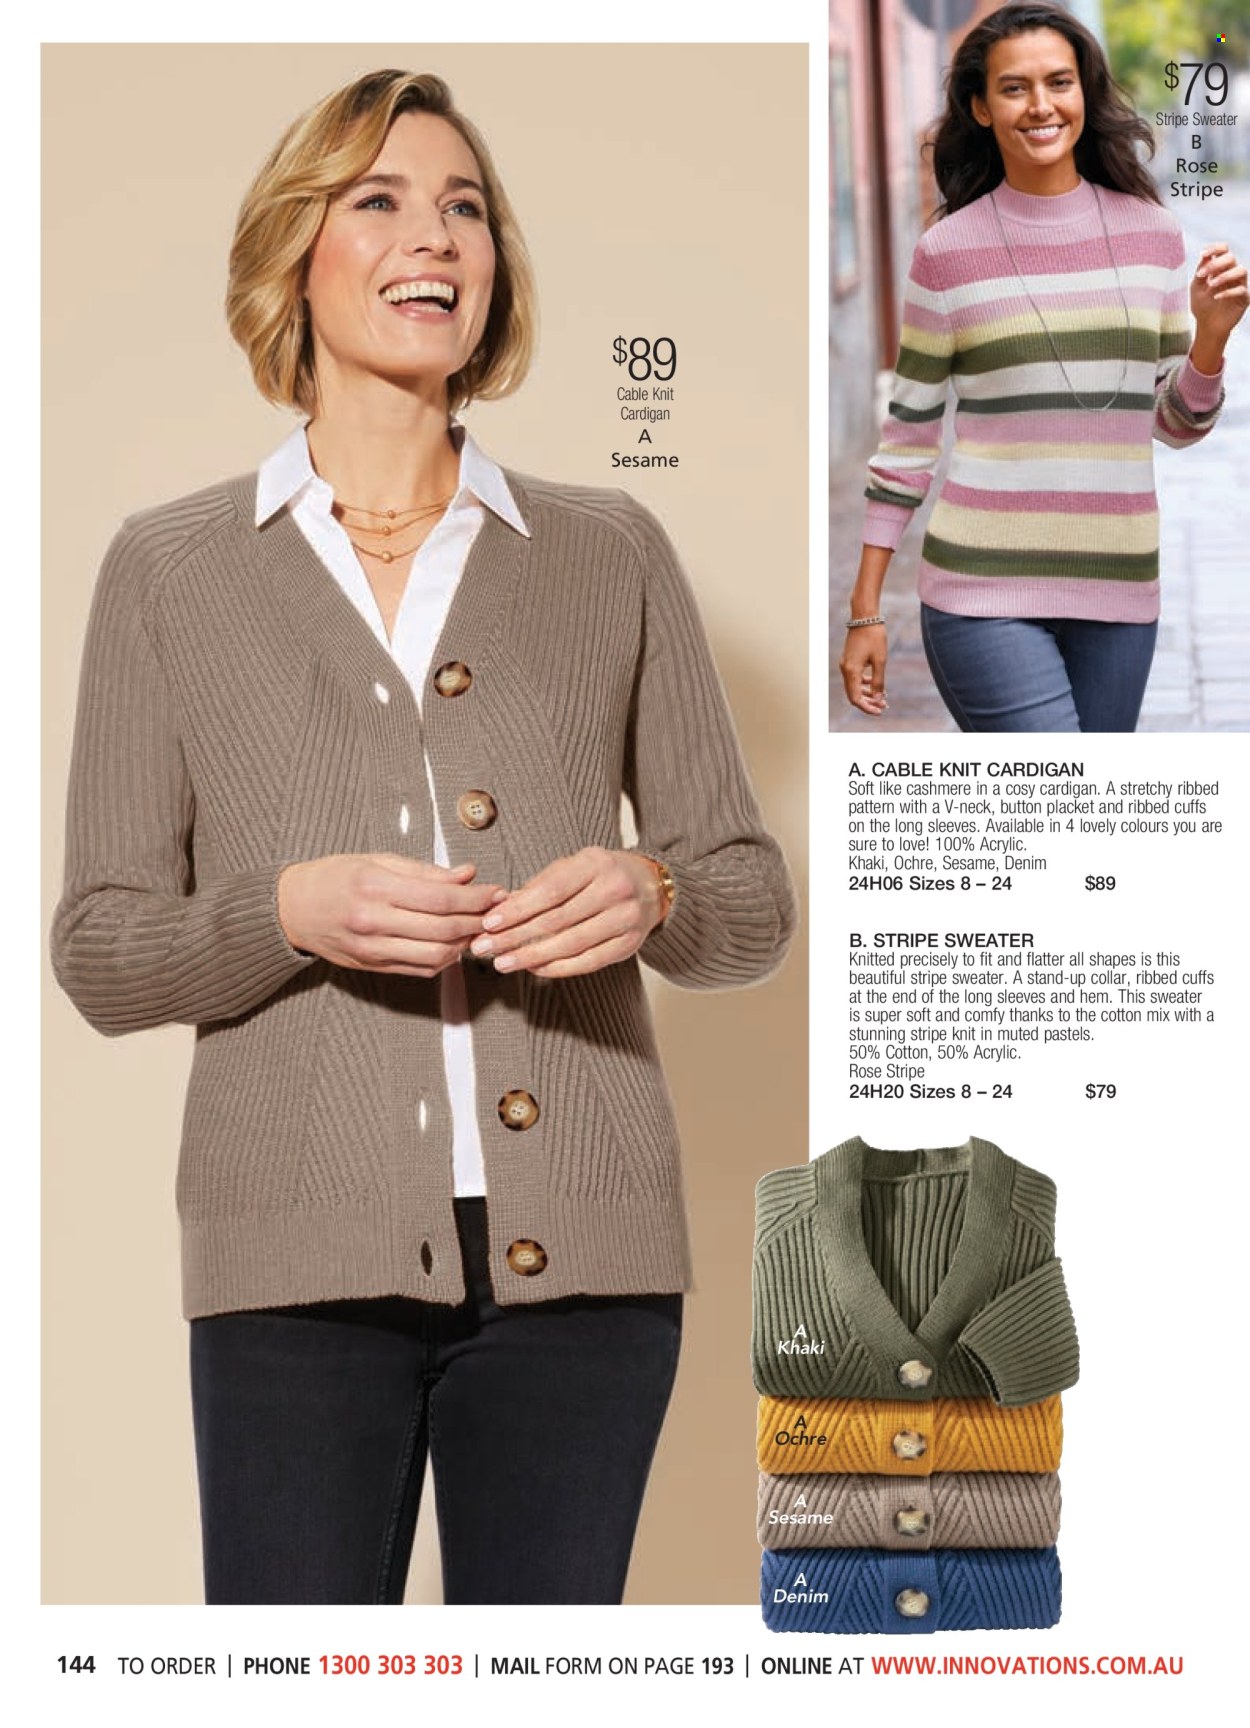 thumbnail - Innovations Catalogue - Sales products - Denim, cardigan, sweater. Page 144.